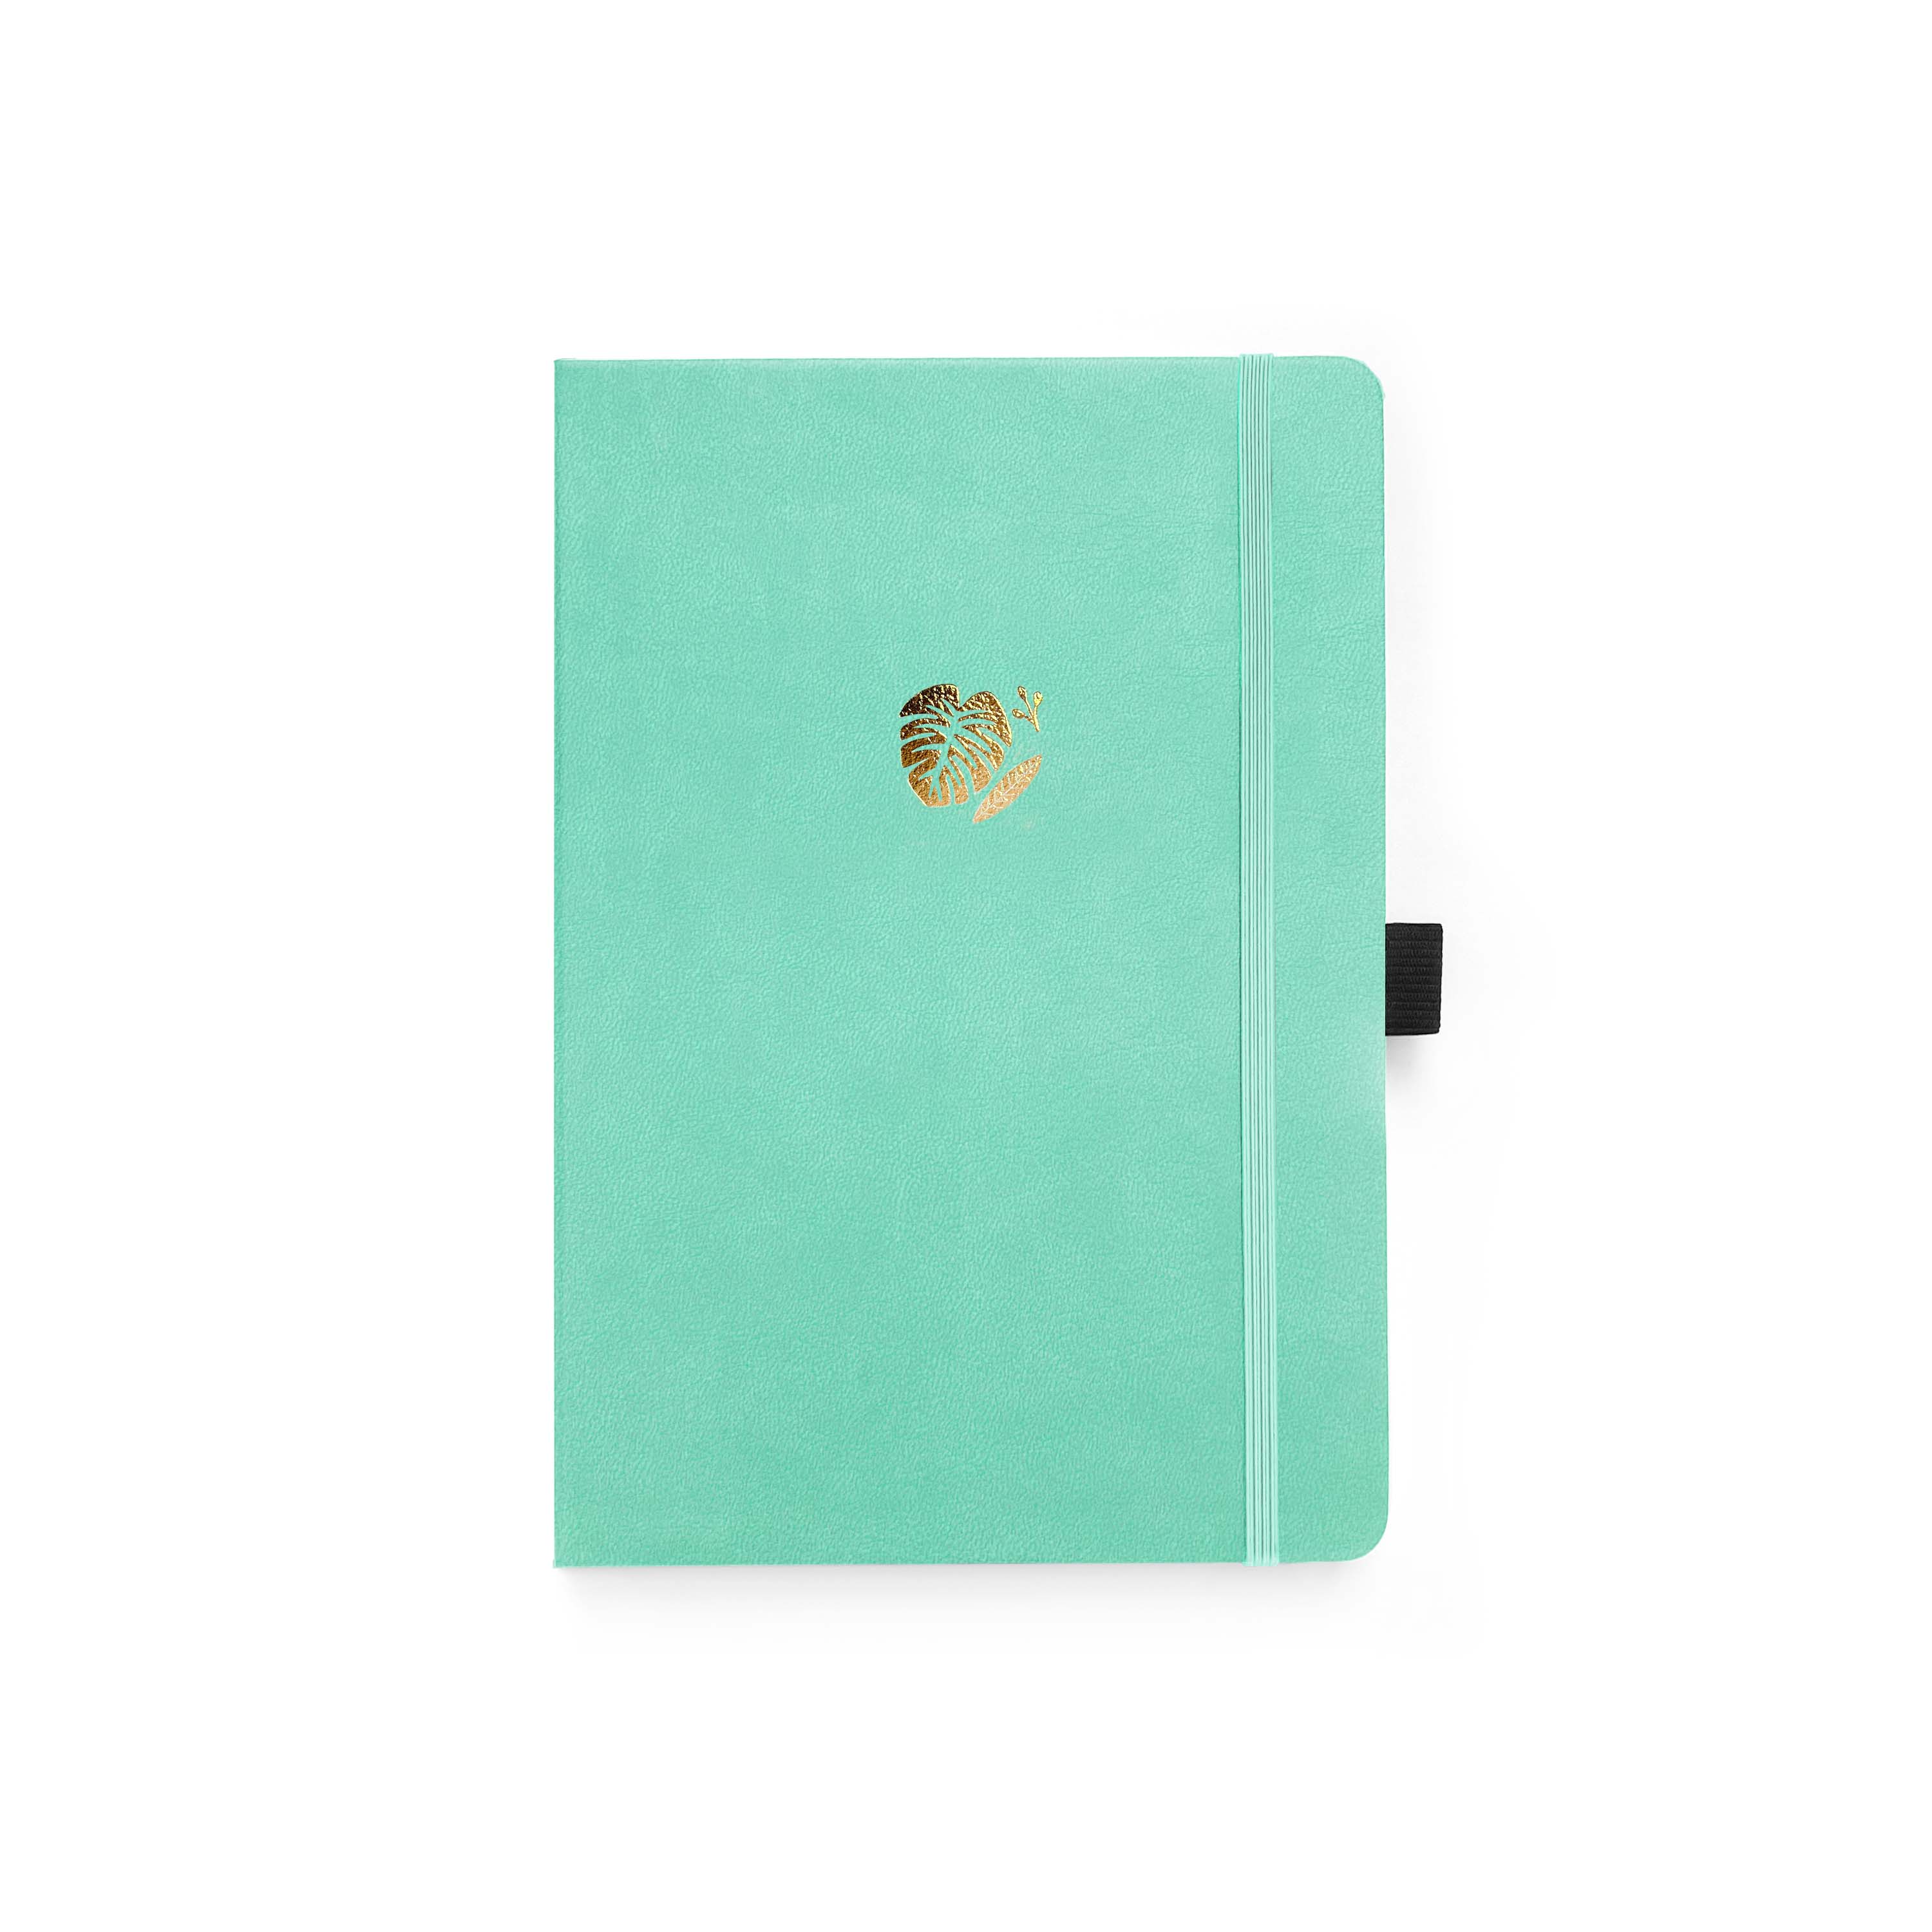 Secret A5 Dot Grid Notebook: Perforated Page SB6 - Archer and Olive